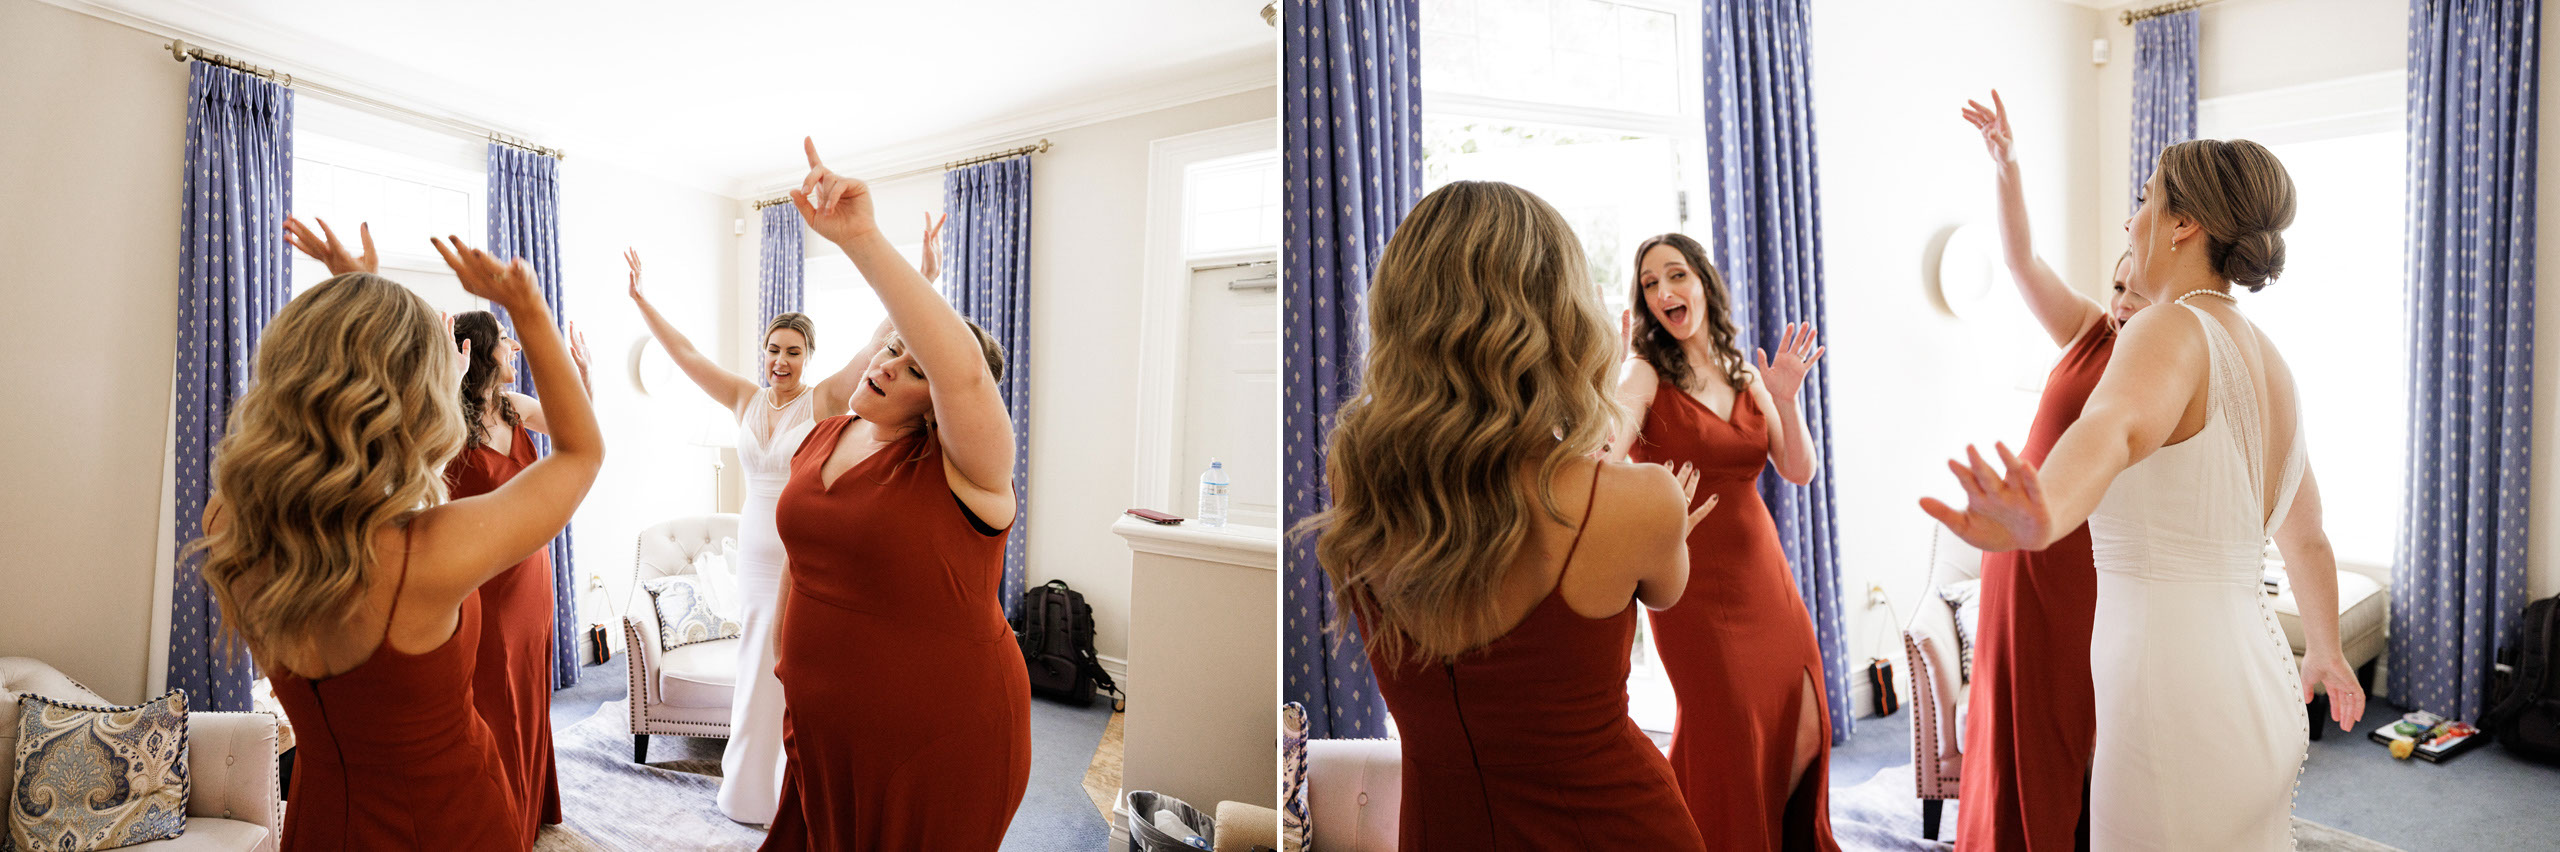 bridesmaids dancing wedding getting ready photography afterglow